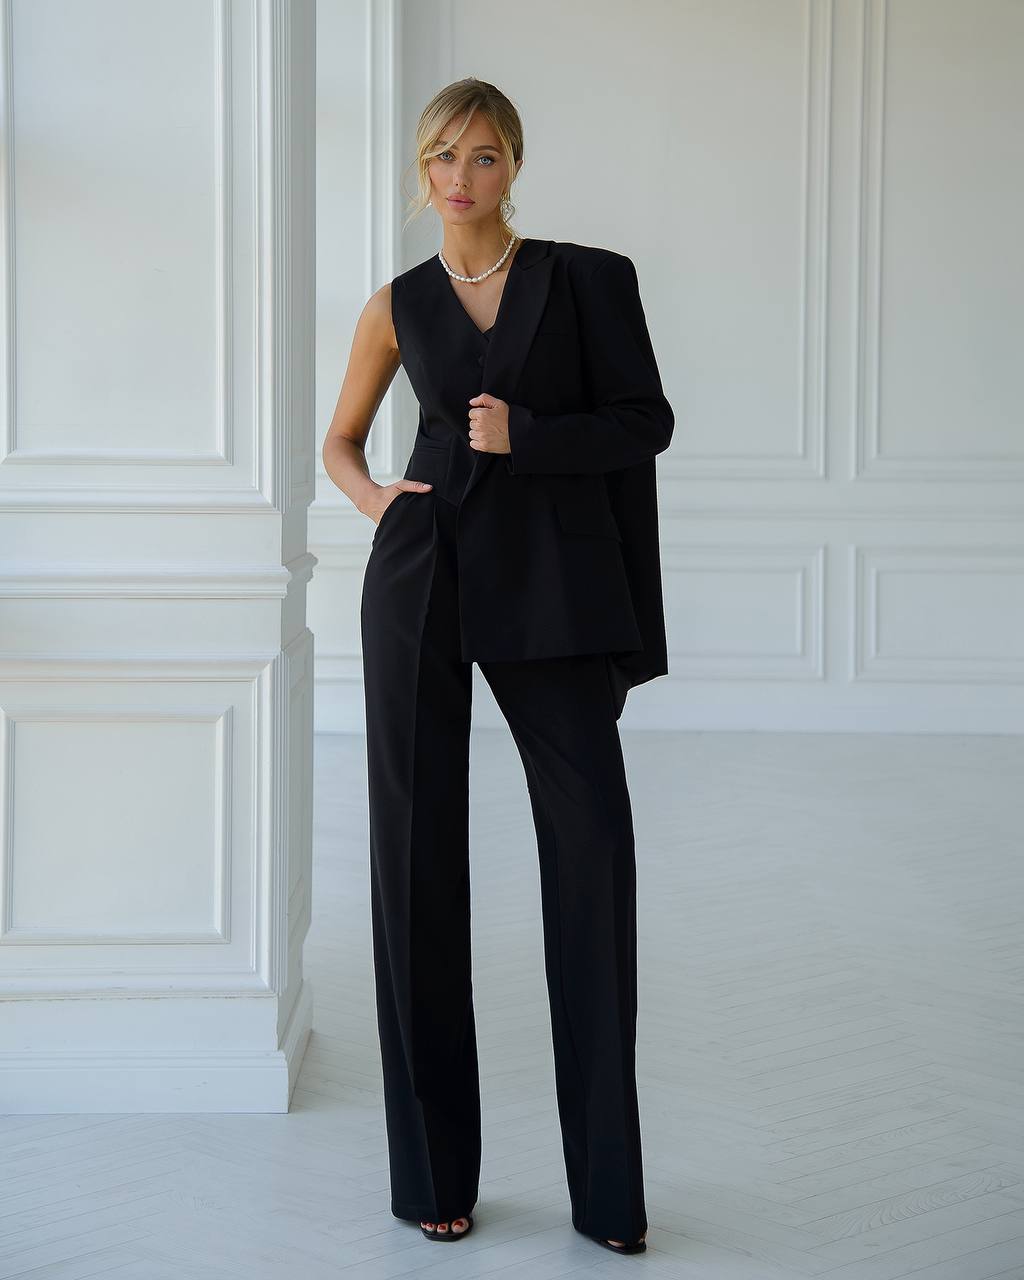 a woman in a black suit standing in a white room